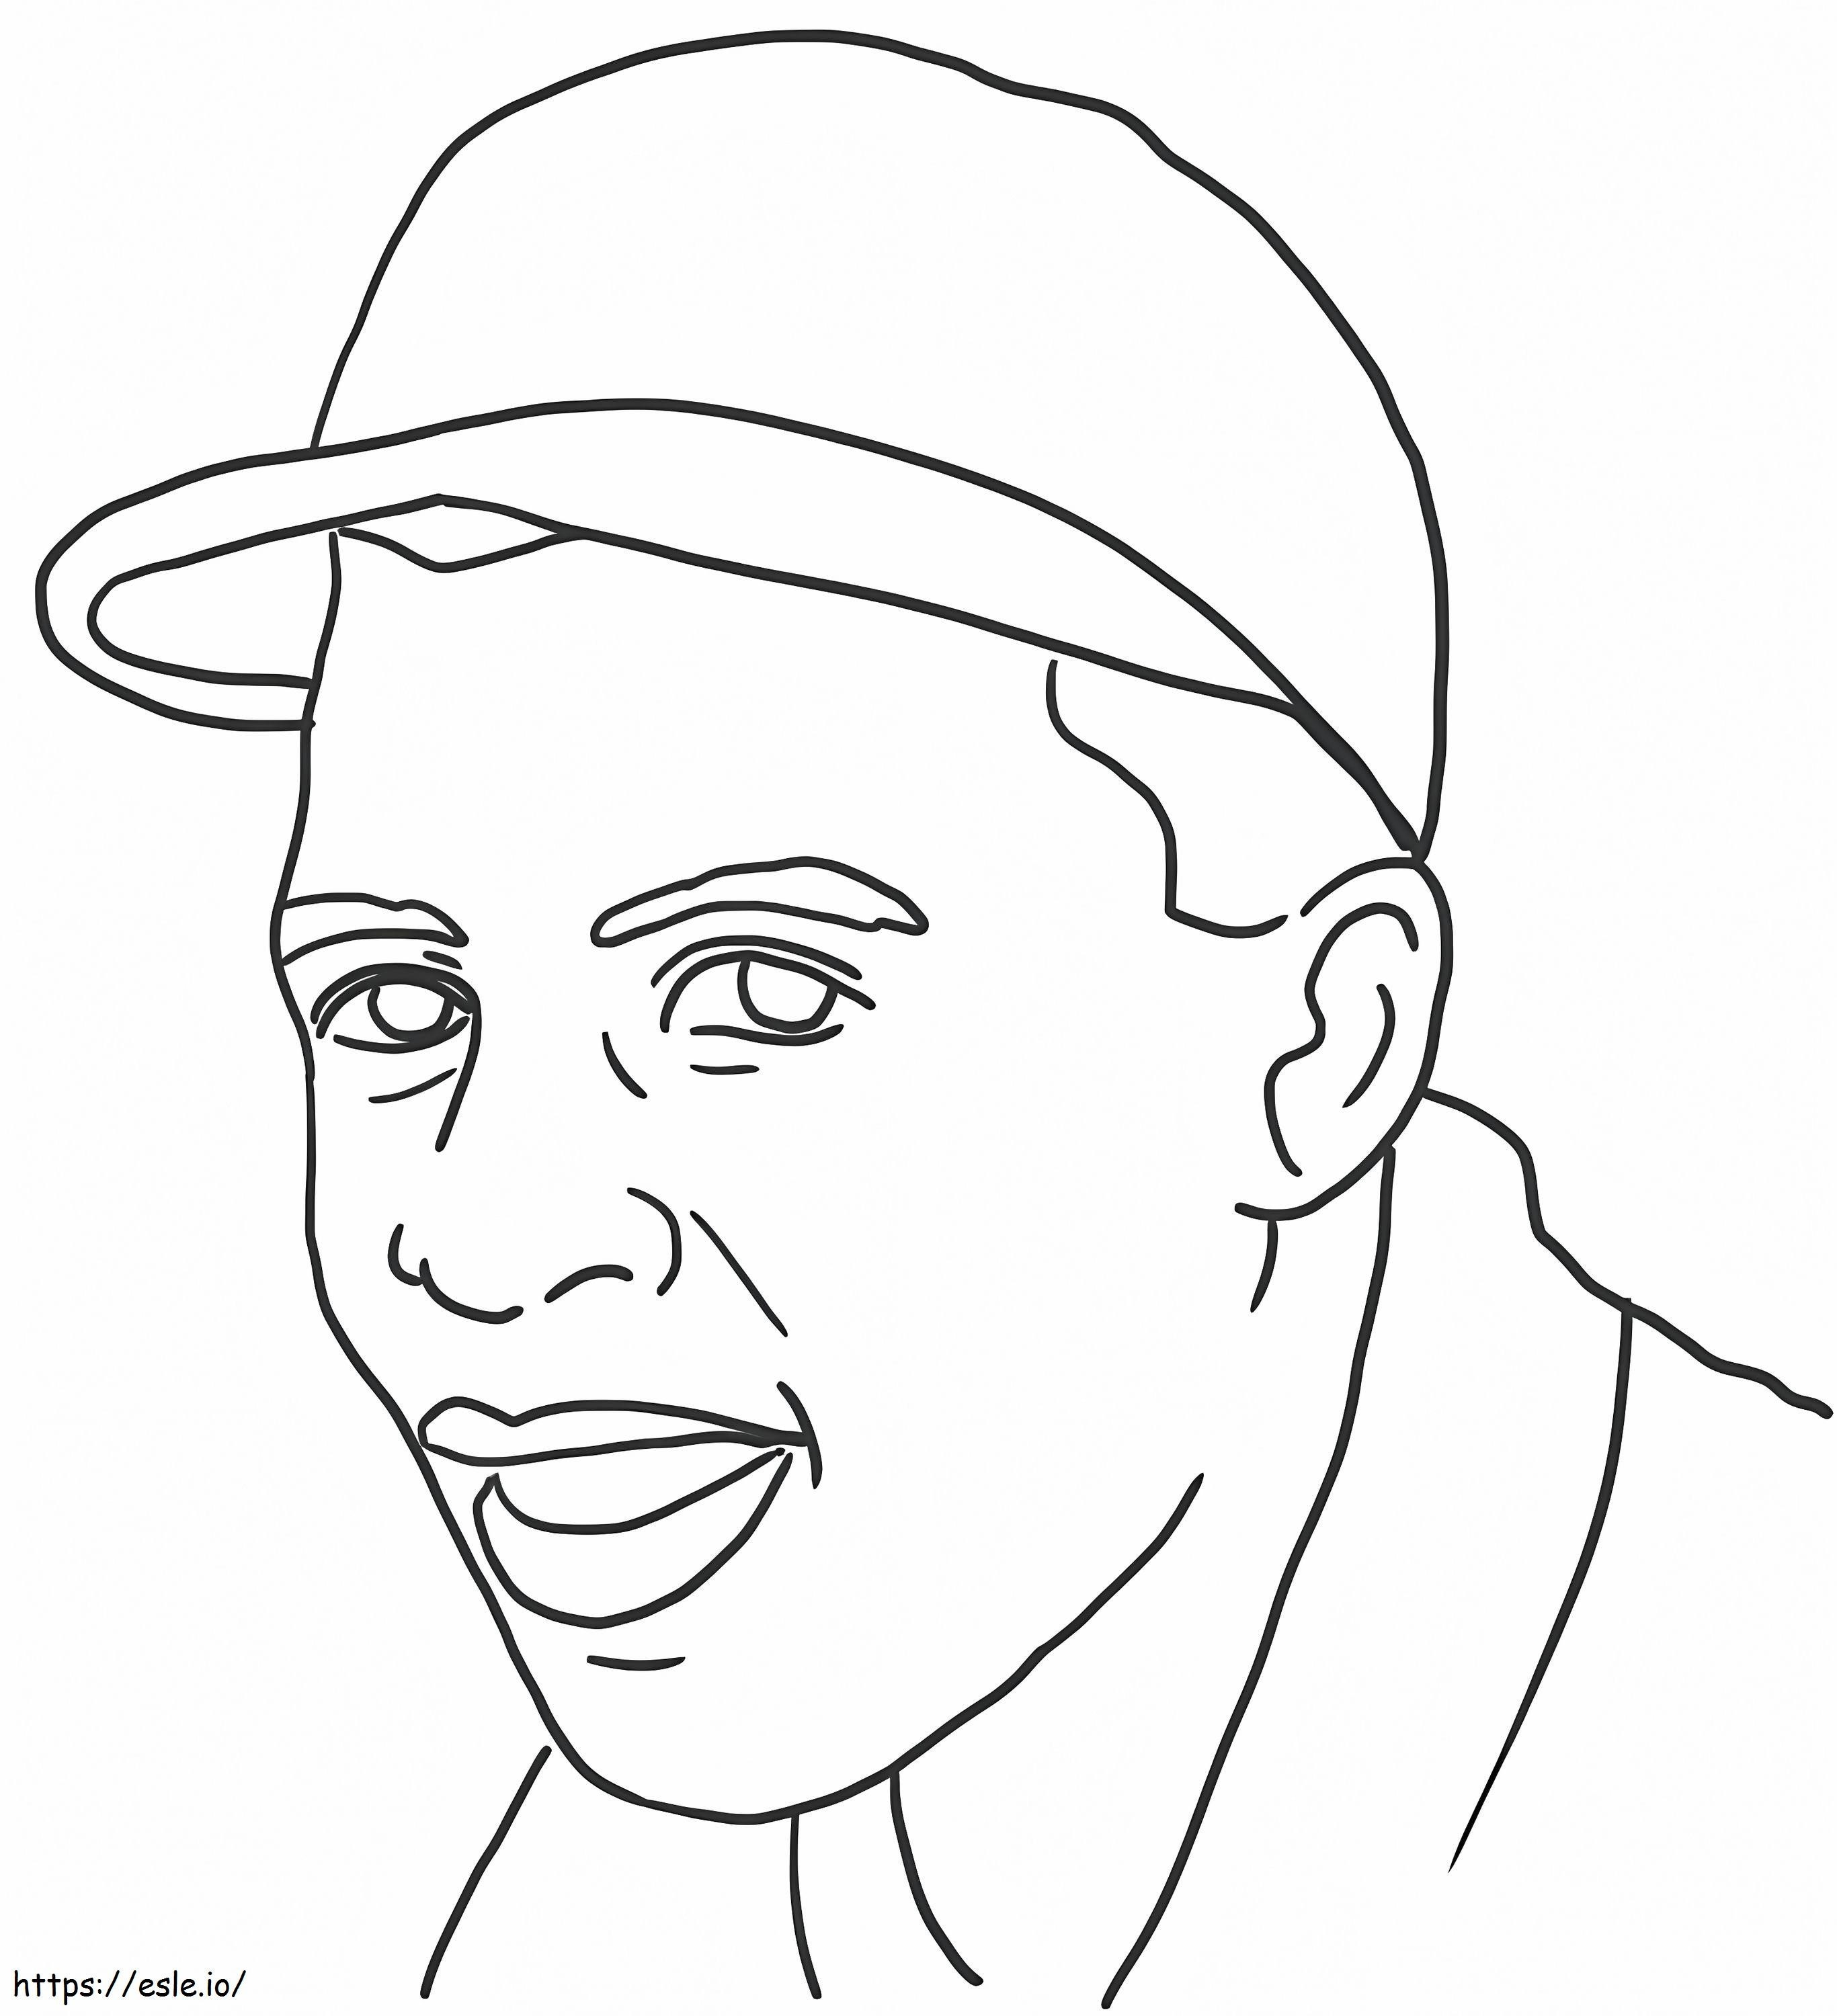 Jackie Robinson 5 coloring page